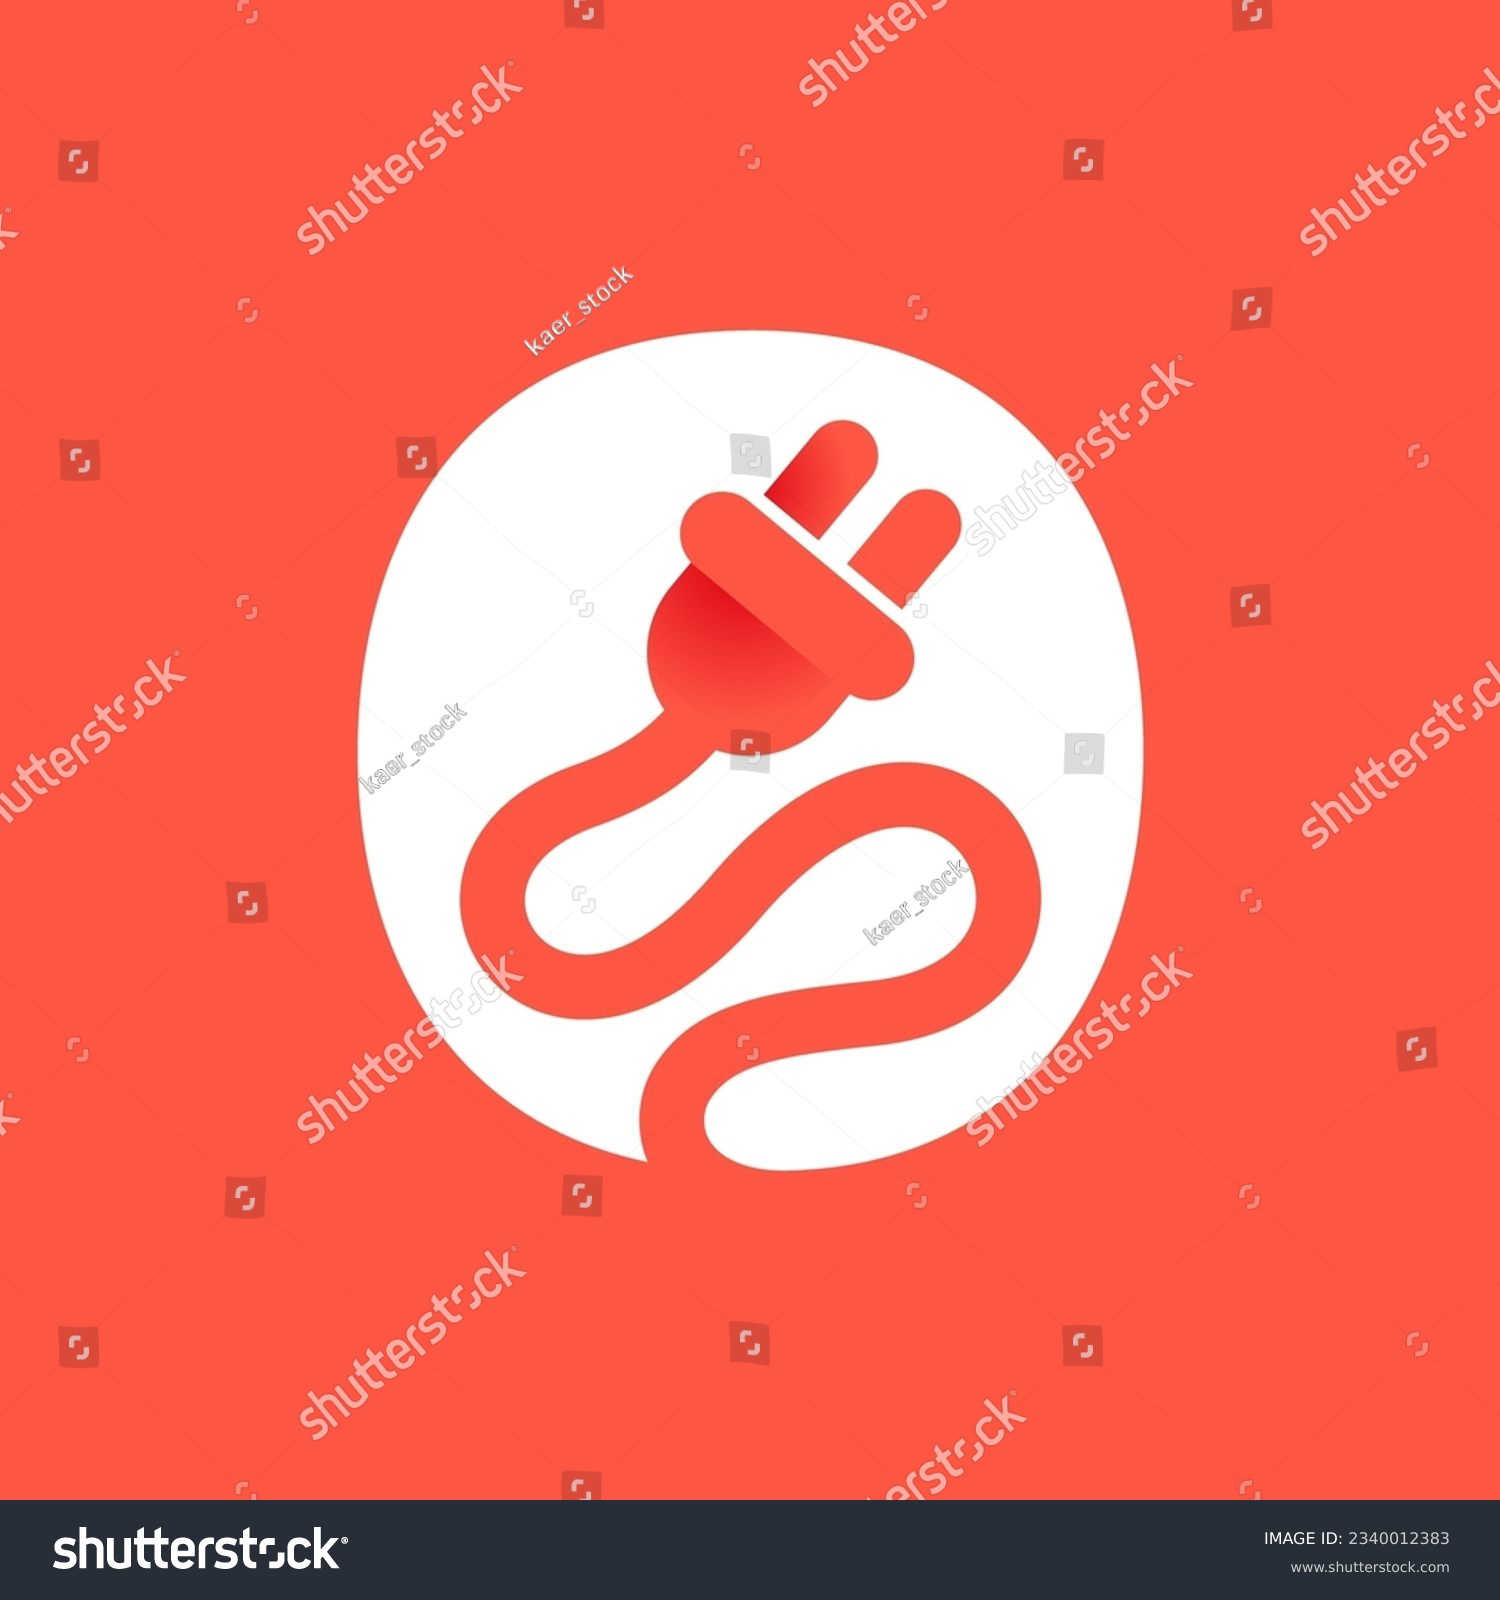 SVG of 0 logo. Number zero with electrical plug logo. Negative space technology icon. Power energy concept. Vector for electric vehicle identity, eco-friendly hybrid cars, charging point and accessories. svg